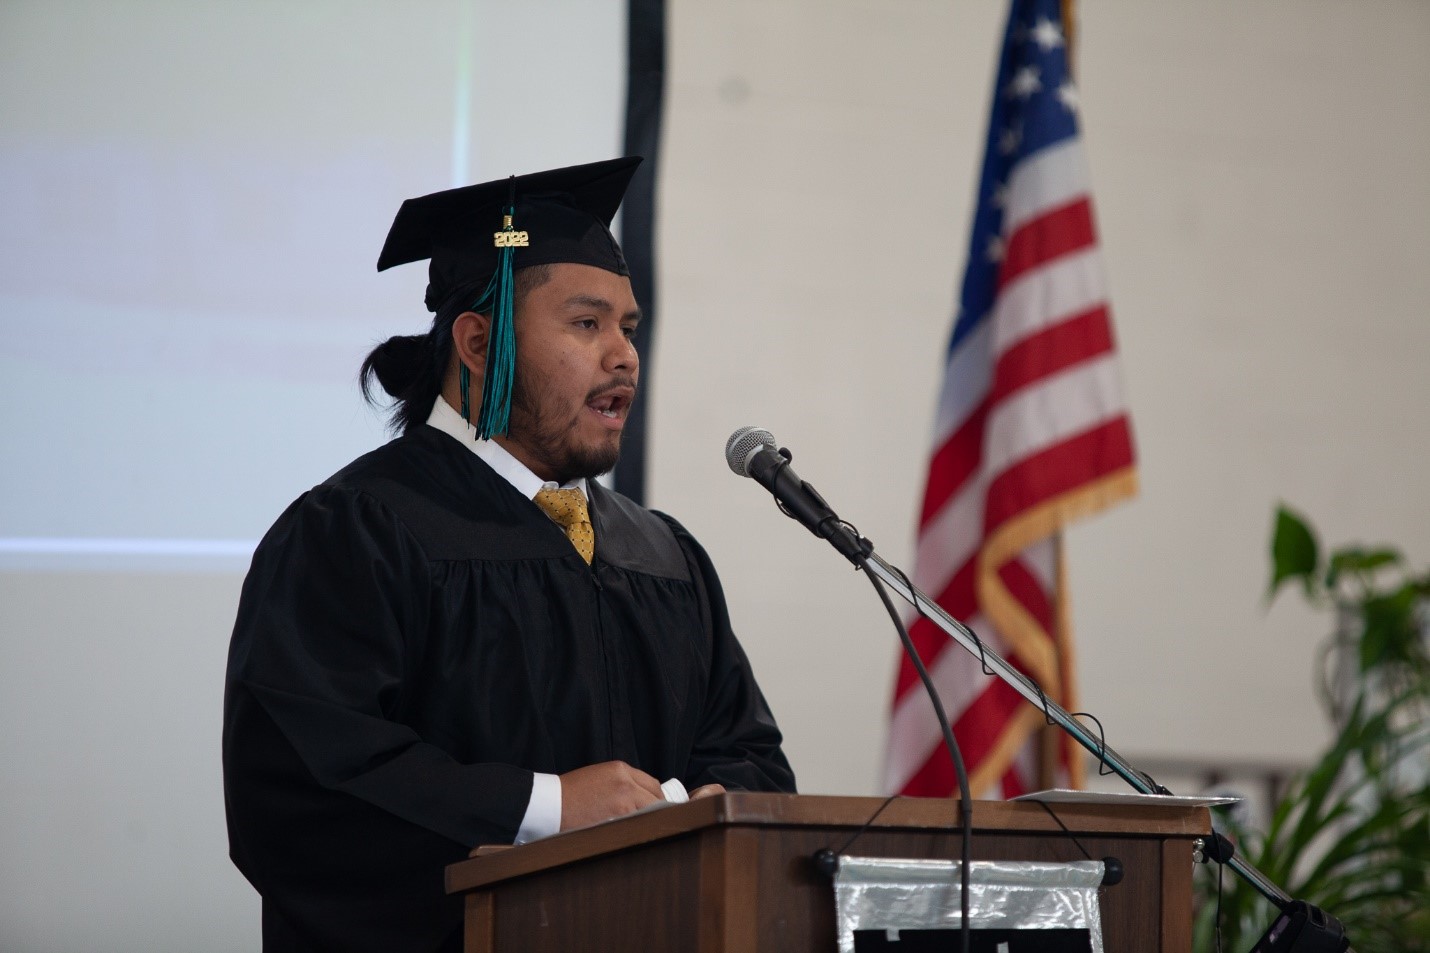 Man in cap and gown speaks at a lectern.